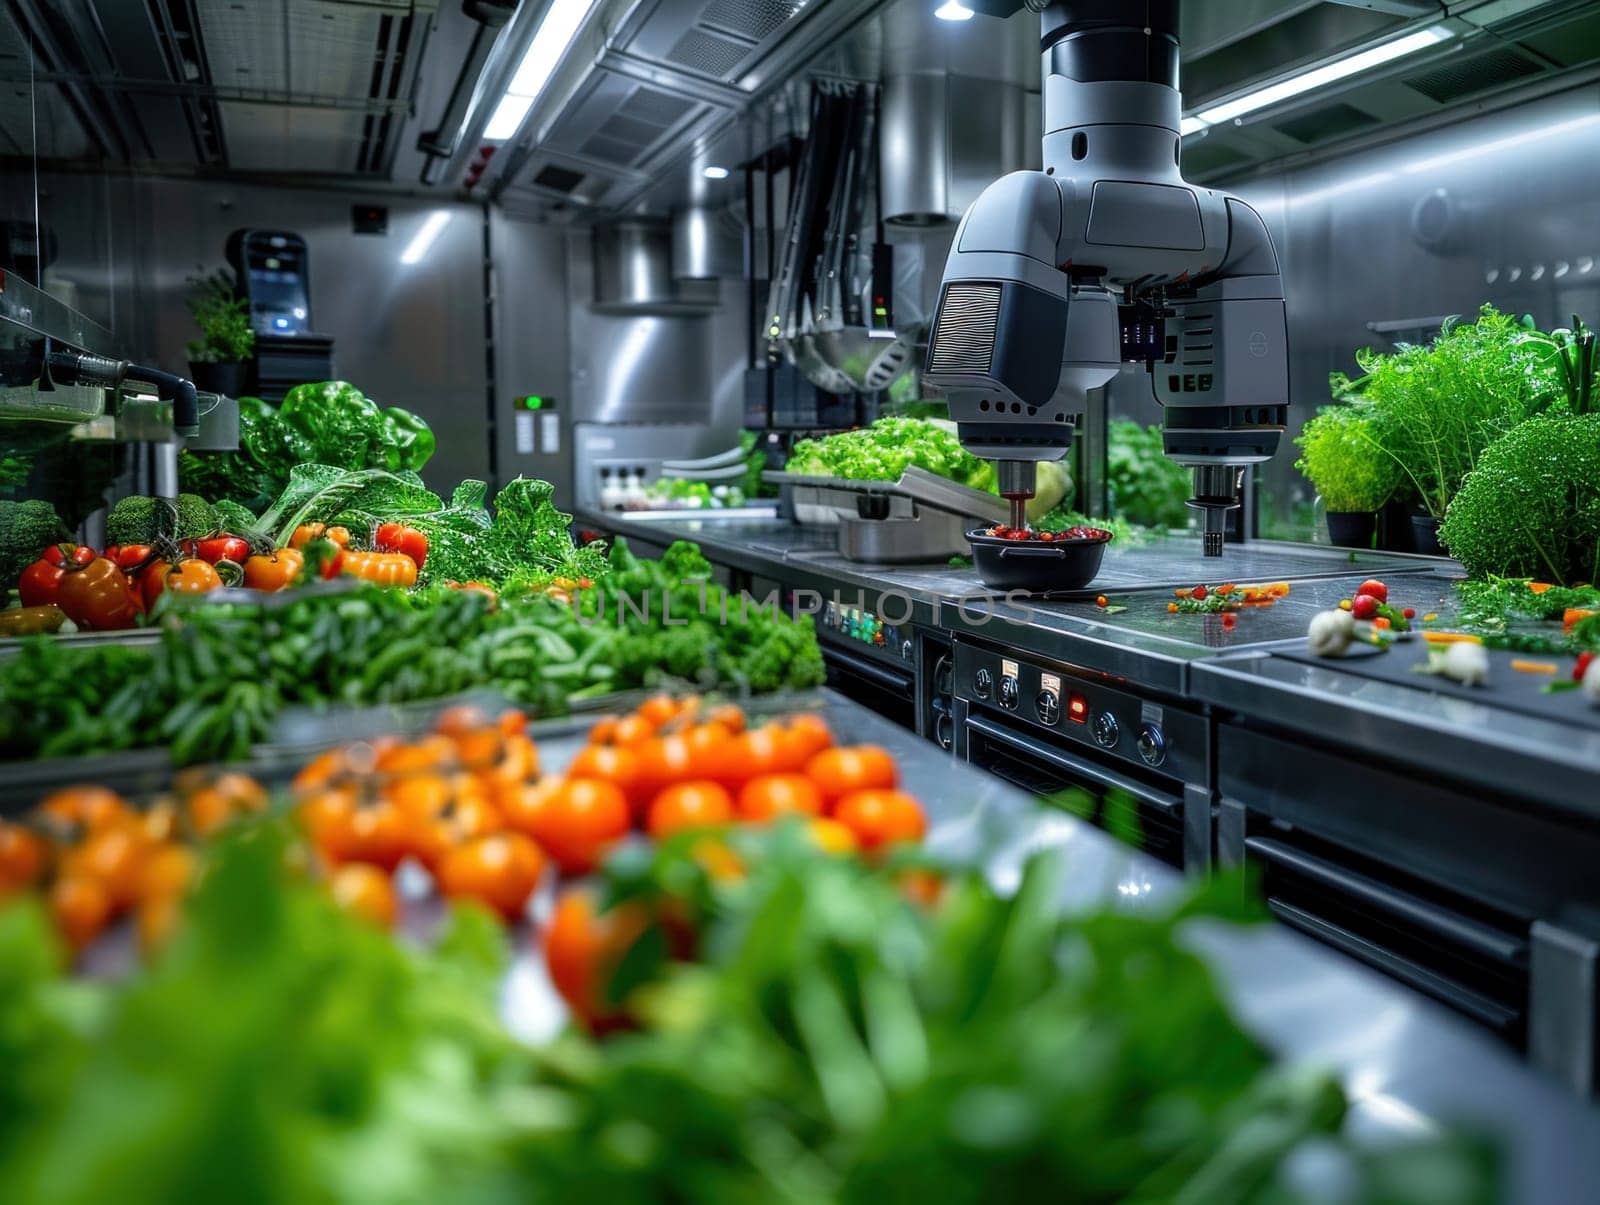 A kitchen filled with a variety of fresh vegetables like tomatoes, broccoli, carrots, and bell peppers.